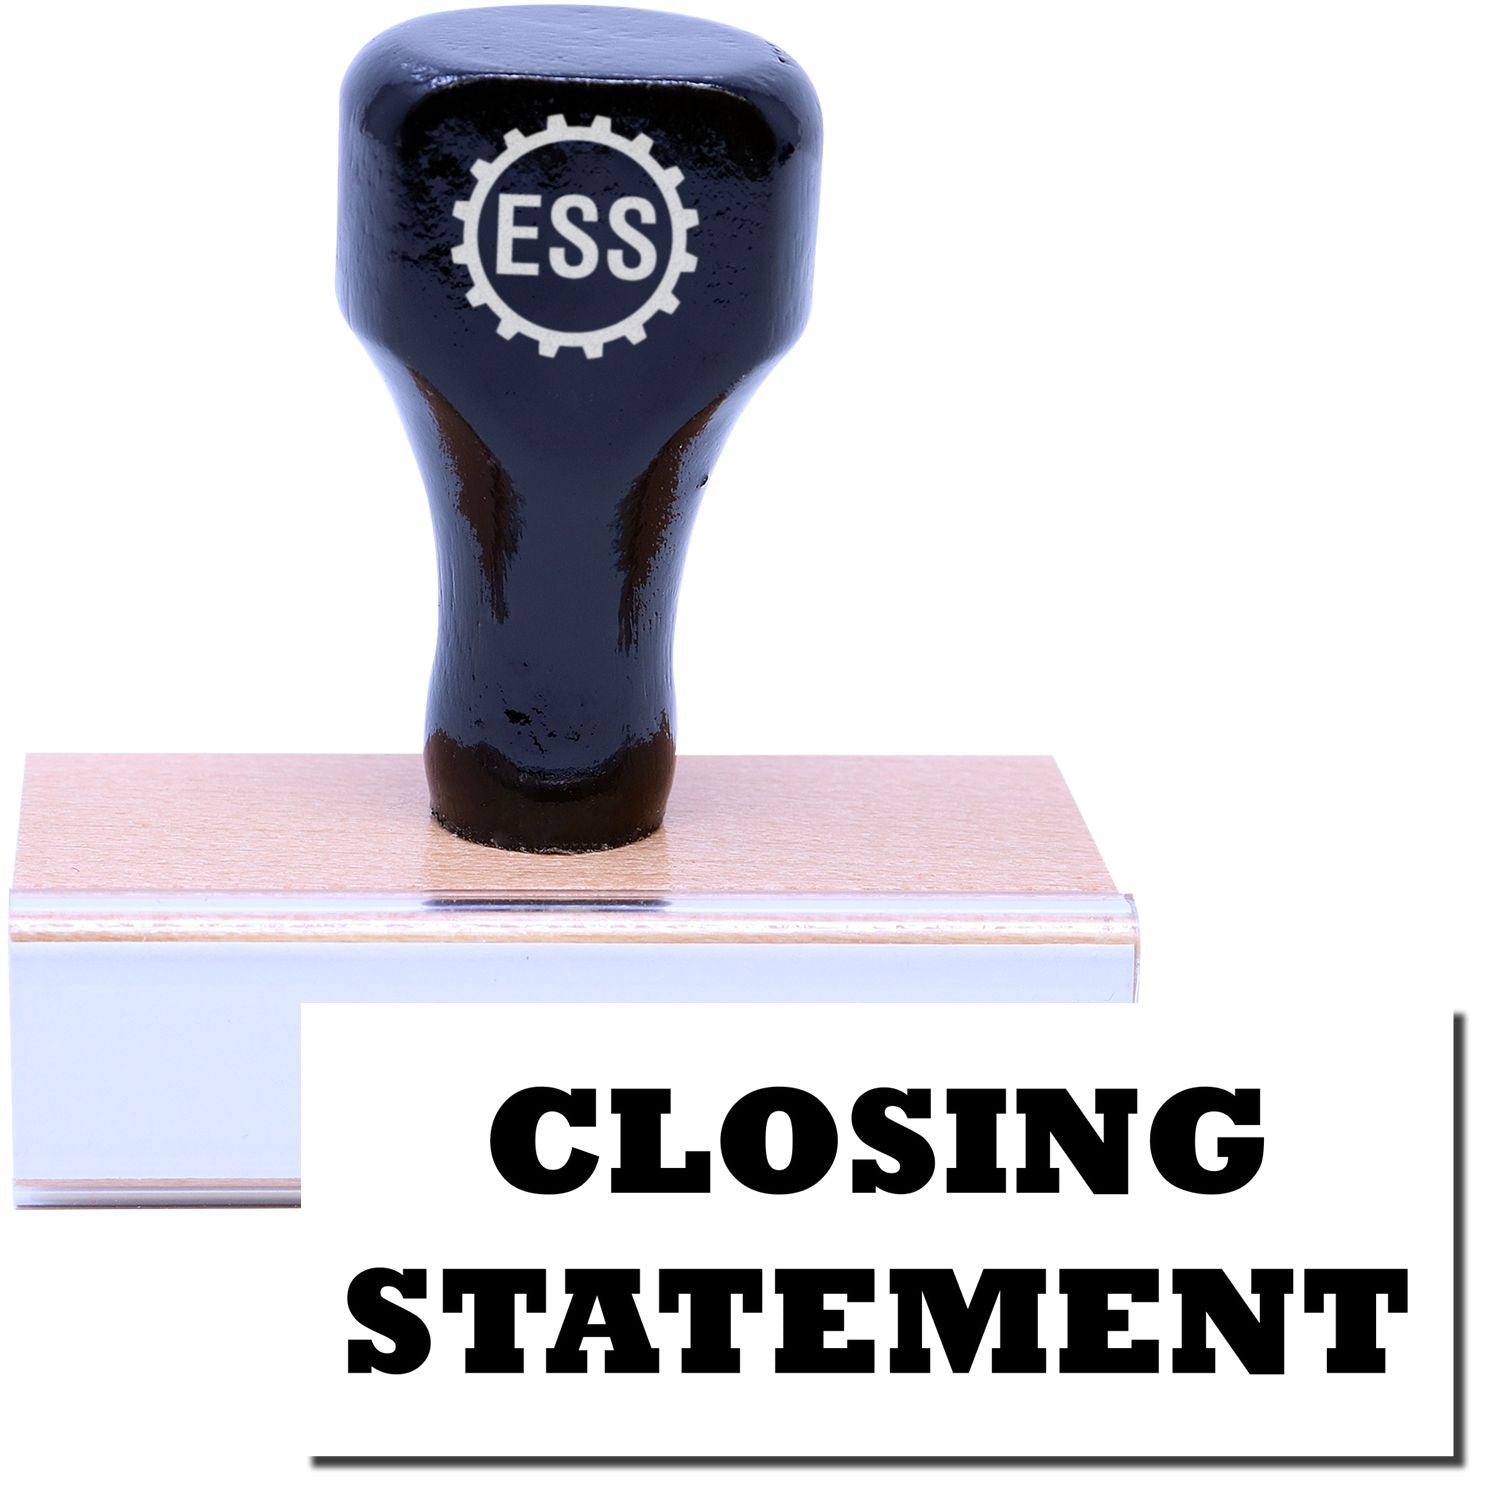 A stock office rubber stamp with a stamped image showing how the text "CLOSING STATEMENT" is displayed after stamping.